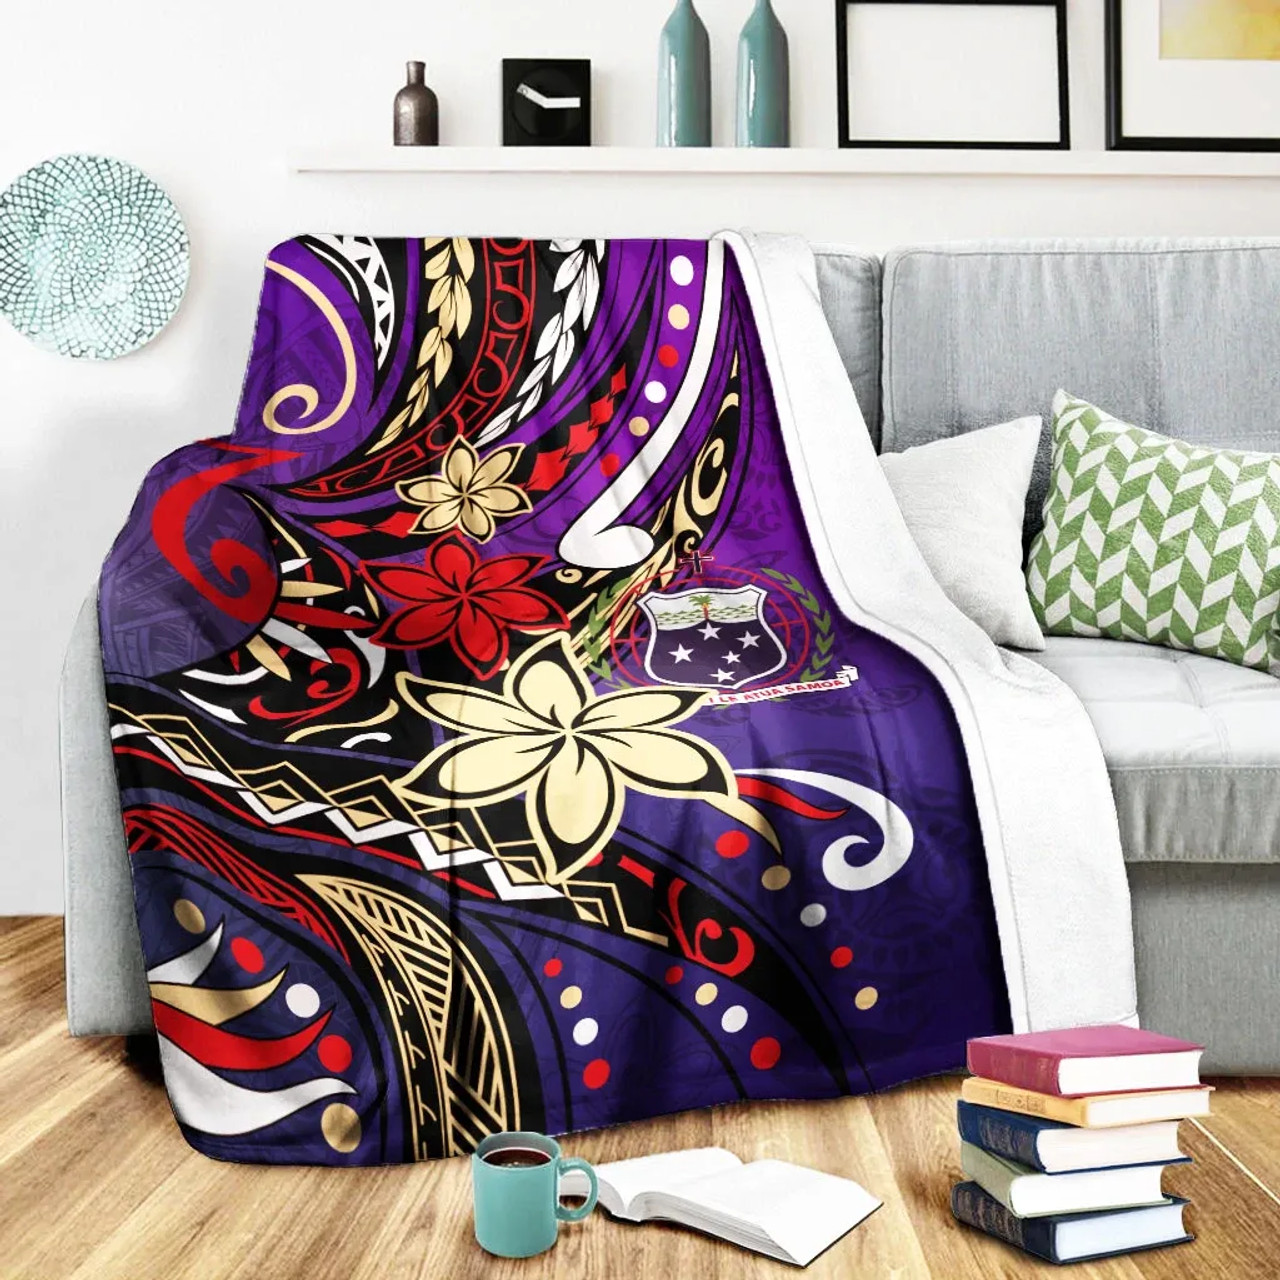 Samoa Premium Blanket - Tribal Flower With Special Turtles Purple Color 3